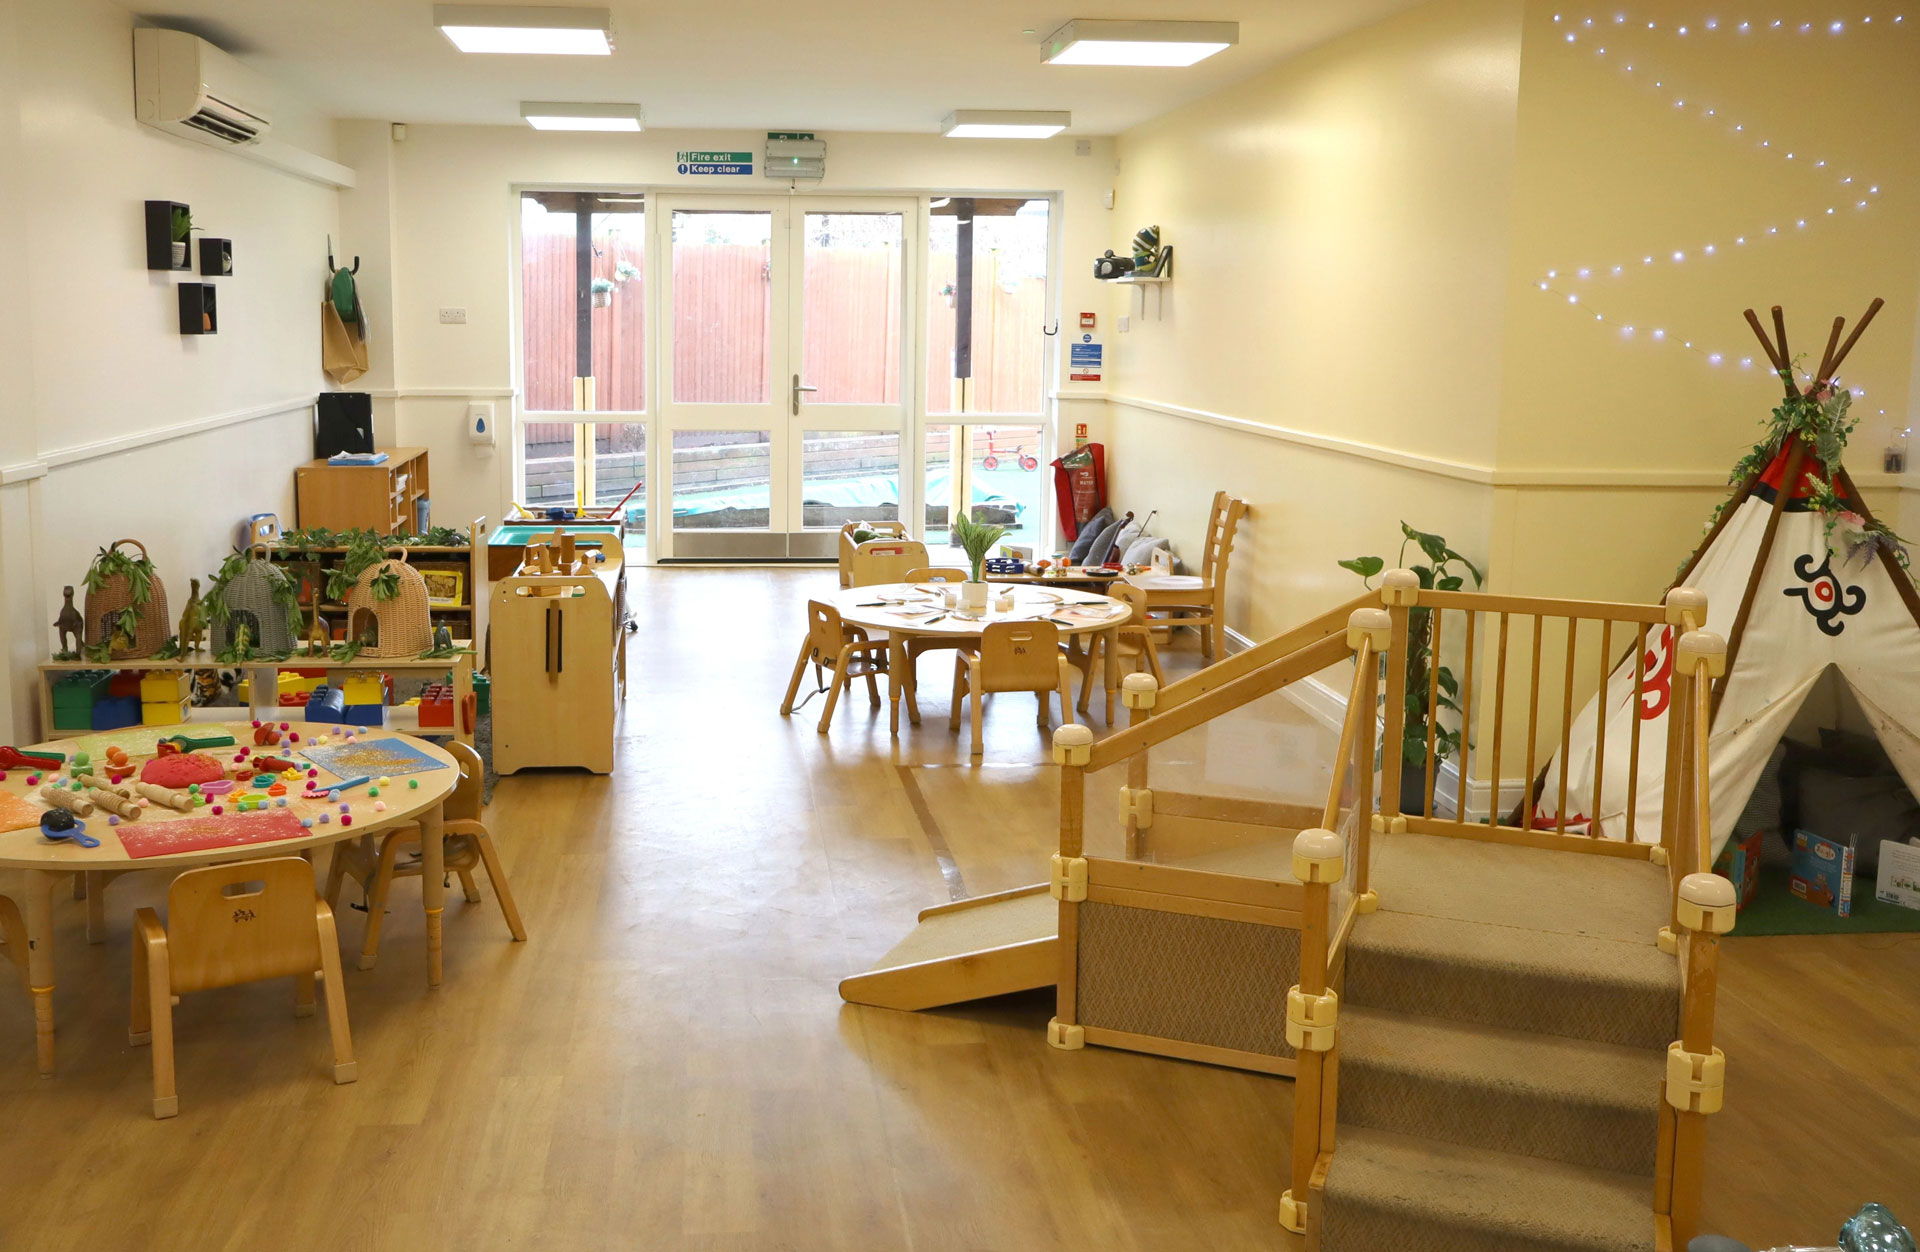 Crouch End Fields Day Nursery and Preschool baby